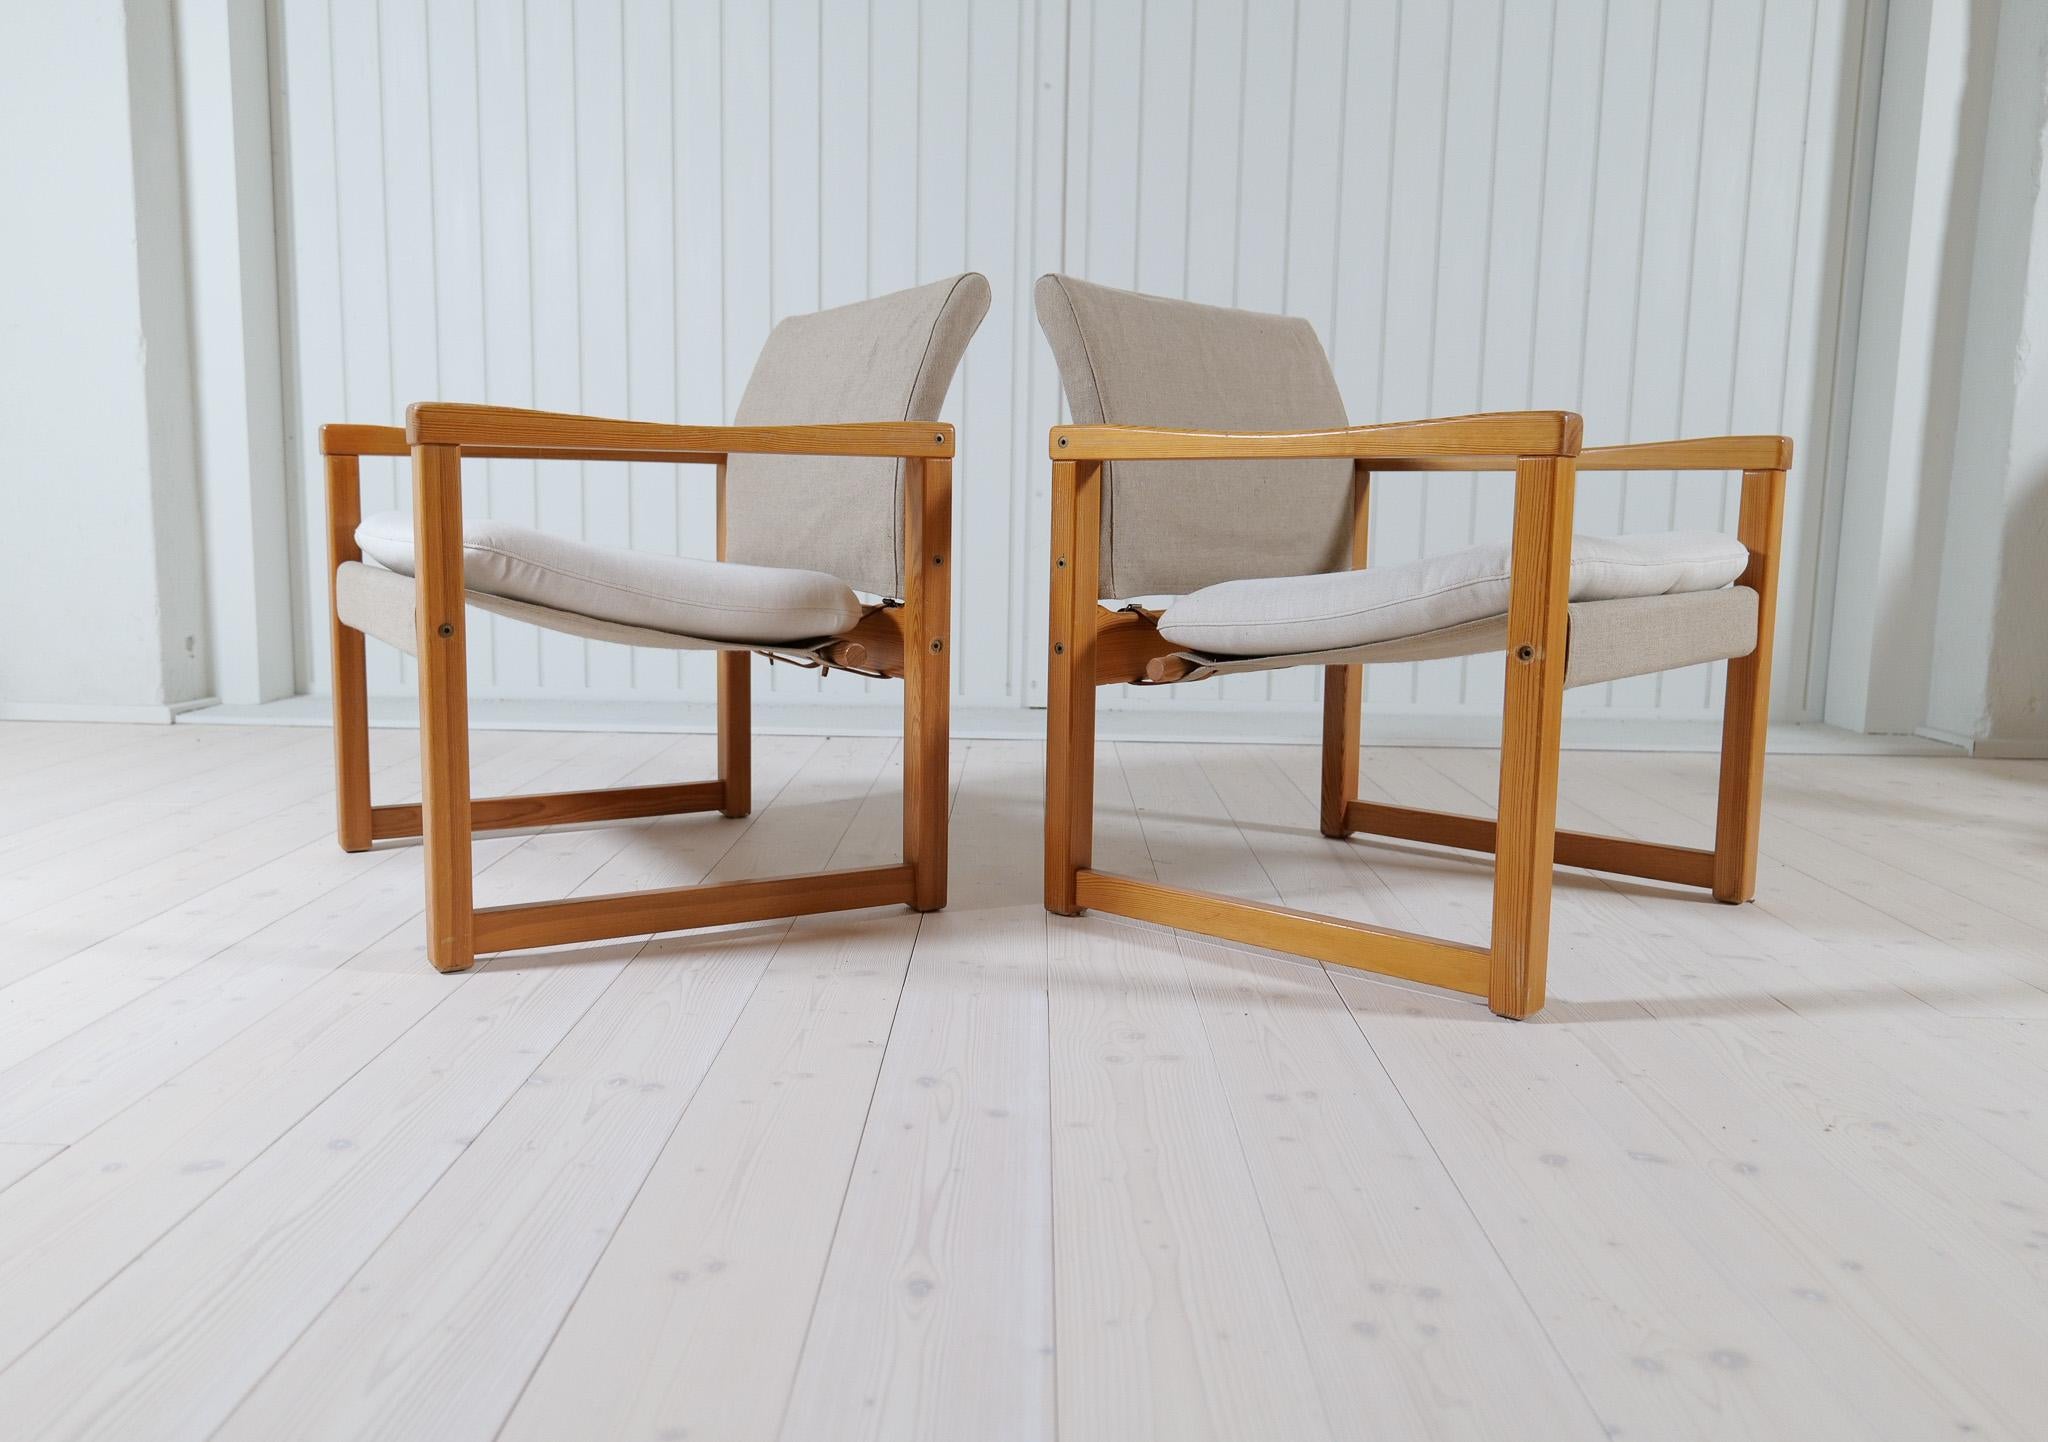 Swedish Midcentury Modern Karin Mobring Armchairs Model Diana by Ikea in Sweden, 1970s For Sale